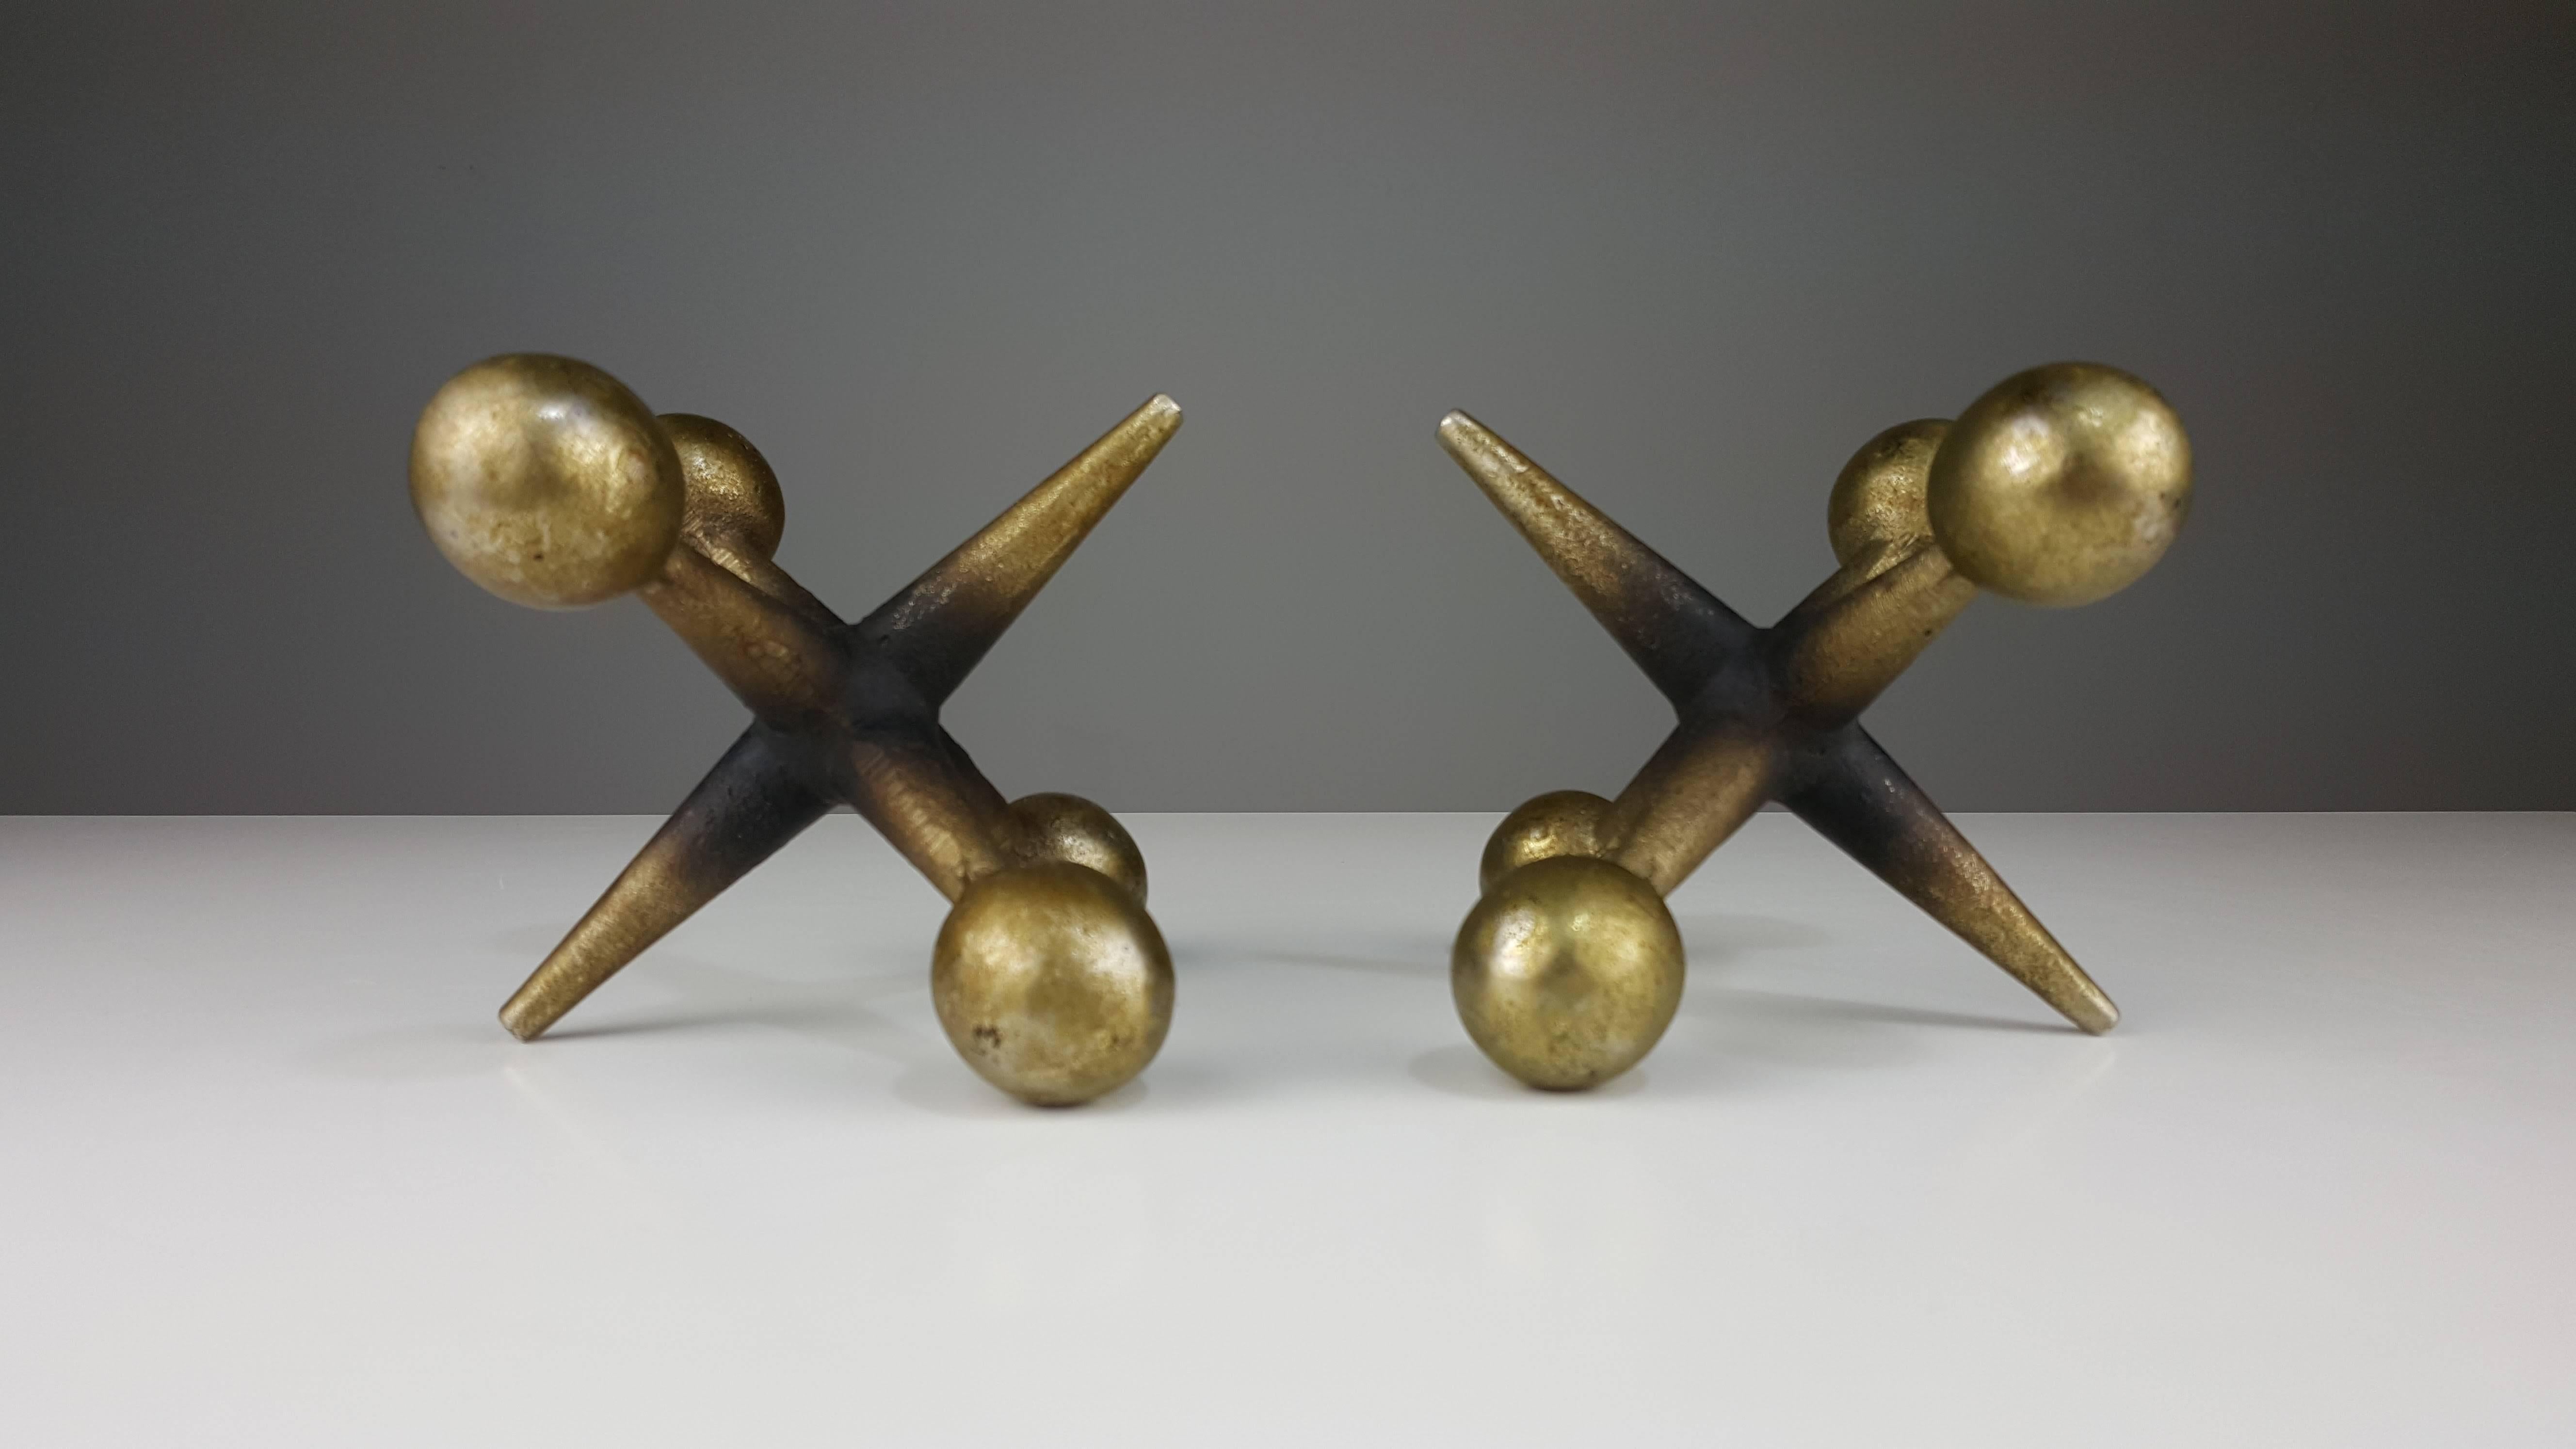 Pair of finely patinated brass Jacks Bookends after Billy Curry, 1970s. Wear throughout.

In the style of George Nelson, Billy Curry, Ben Seibel, etc.